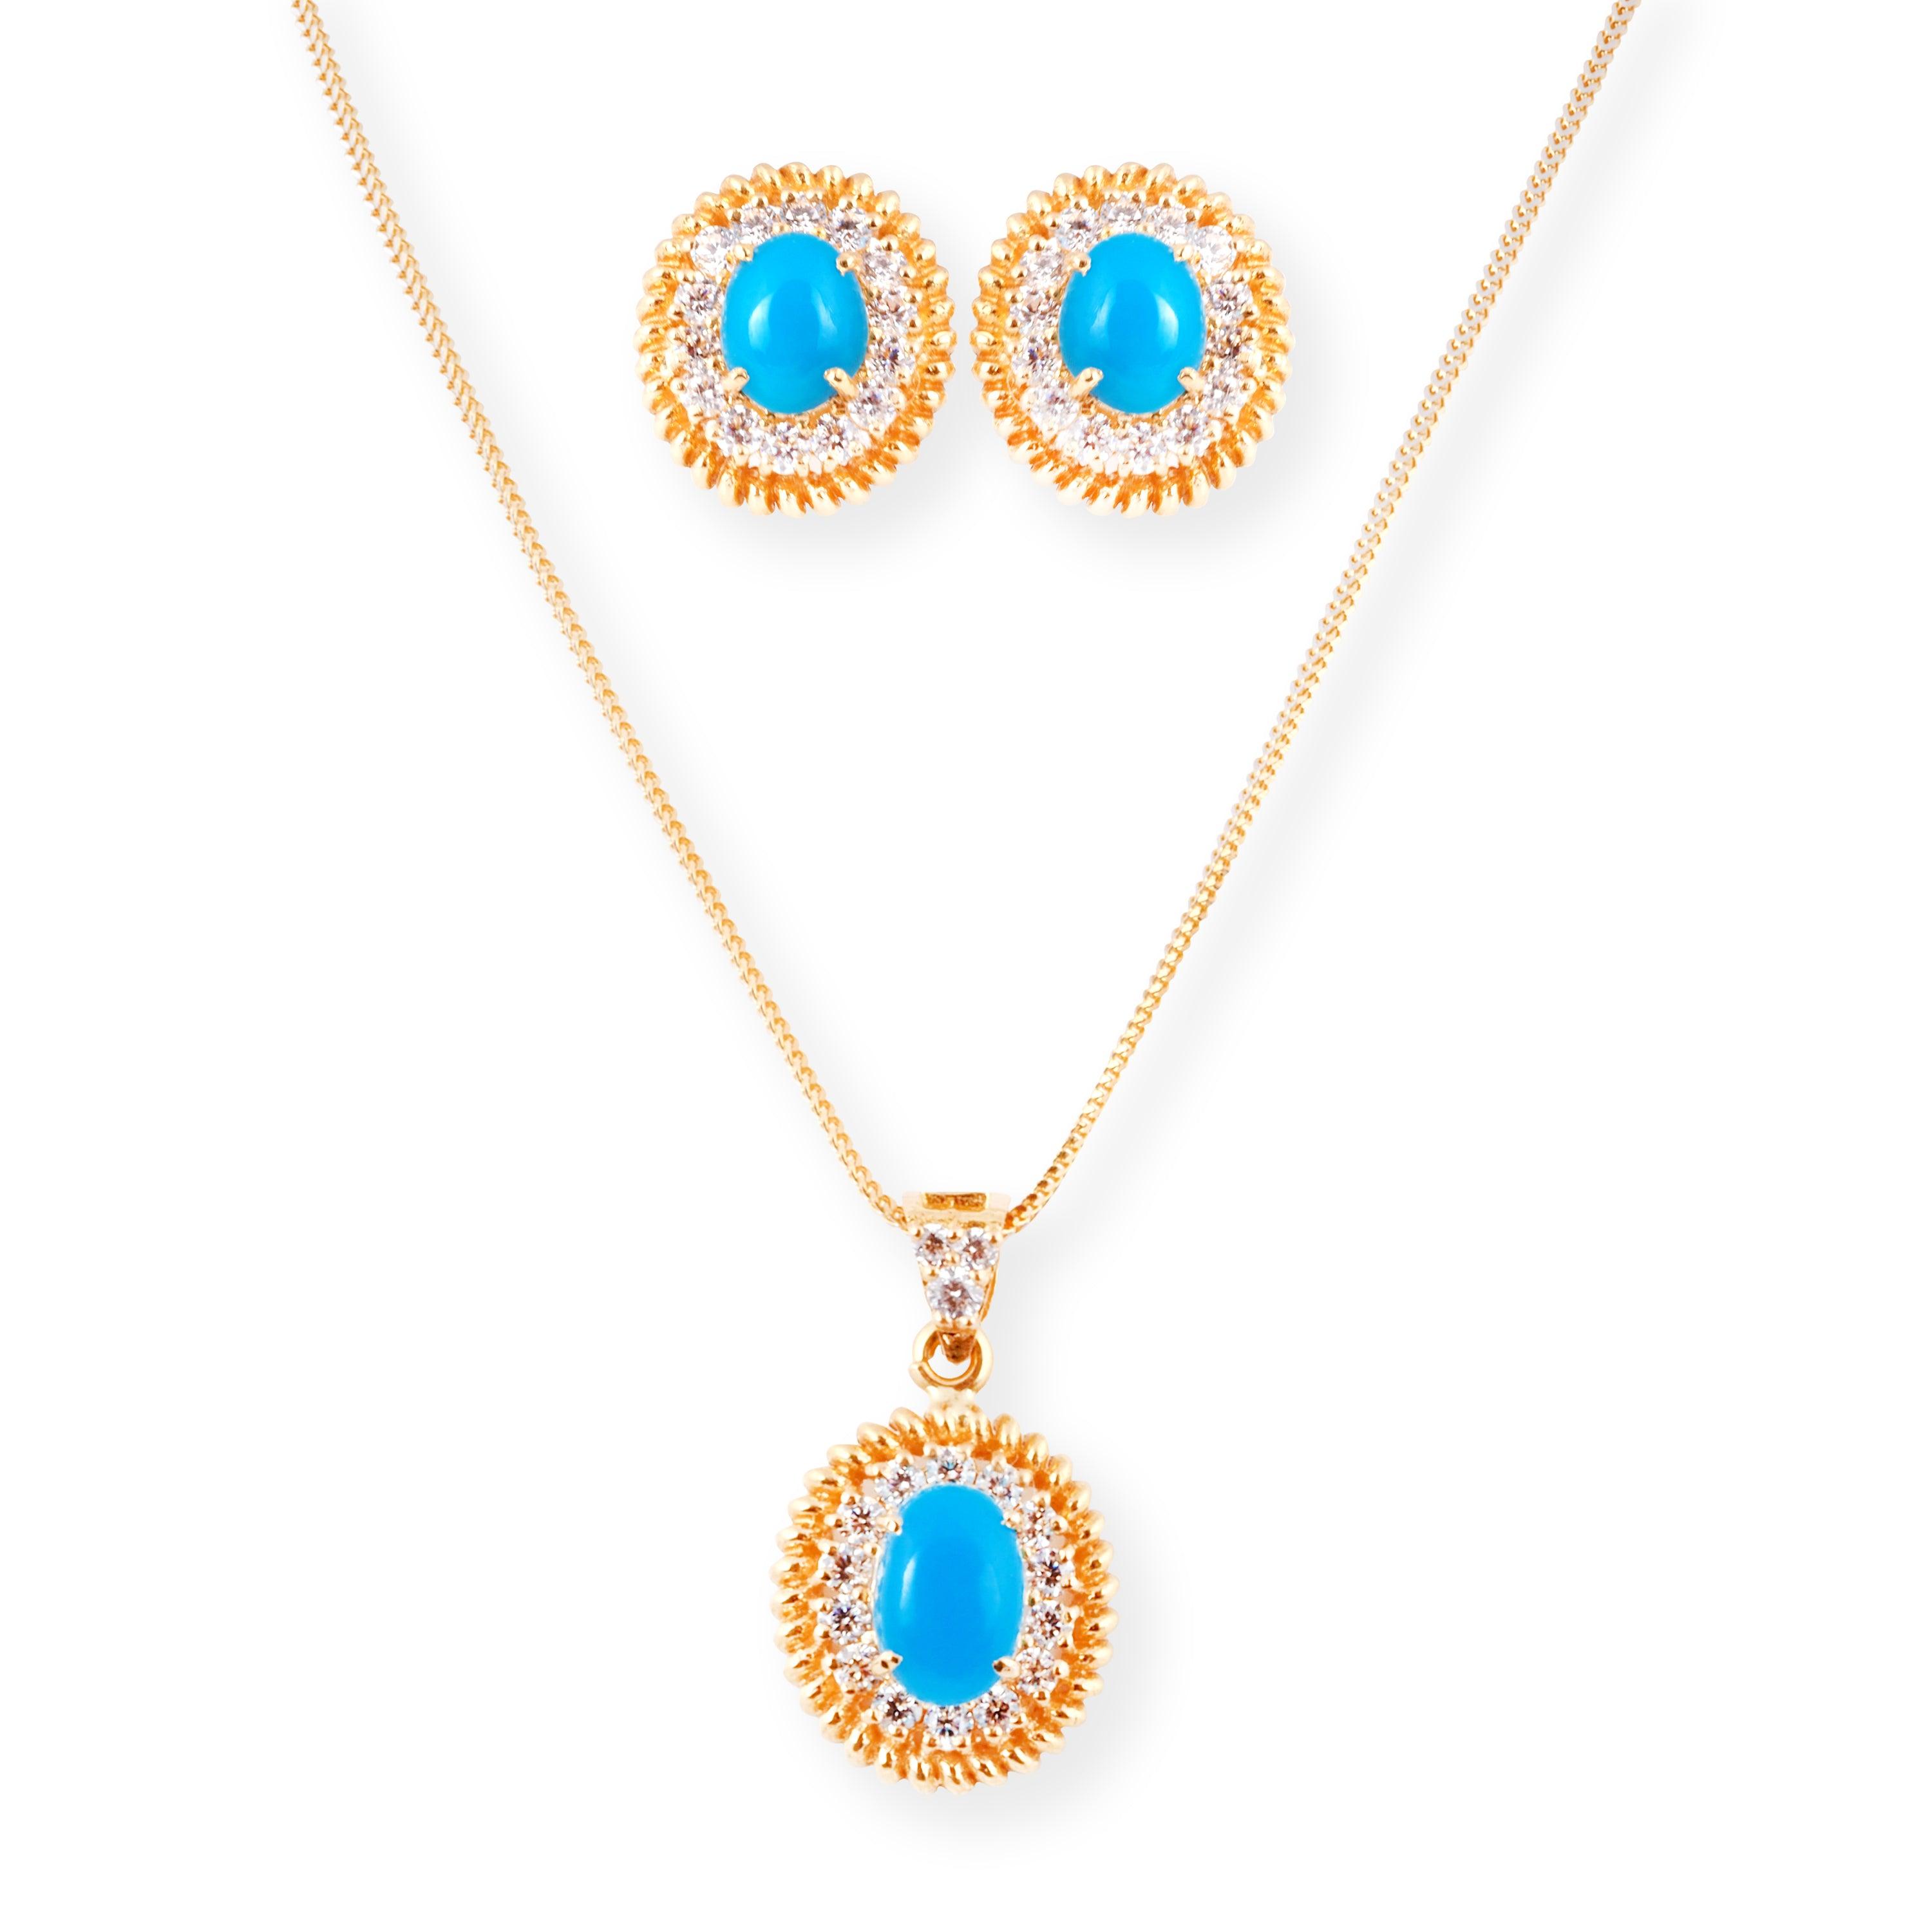 22ct Gold Set with Turquoise and Cubic Zirconia Stones (Pendant + Chain + Earrings)-8542 - Minar Jewellers